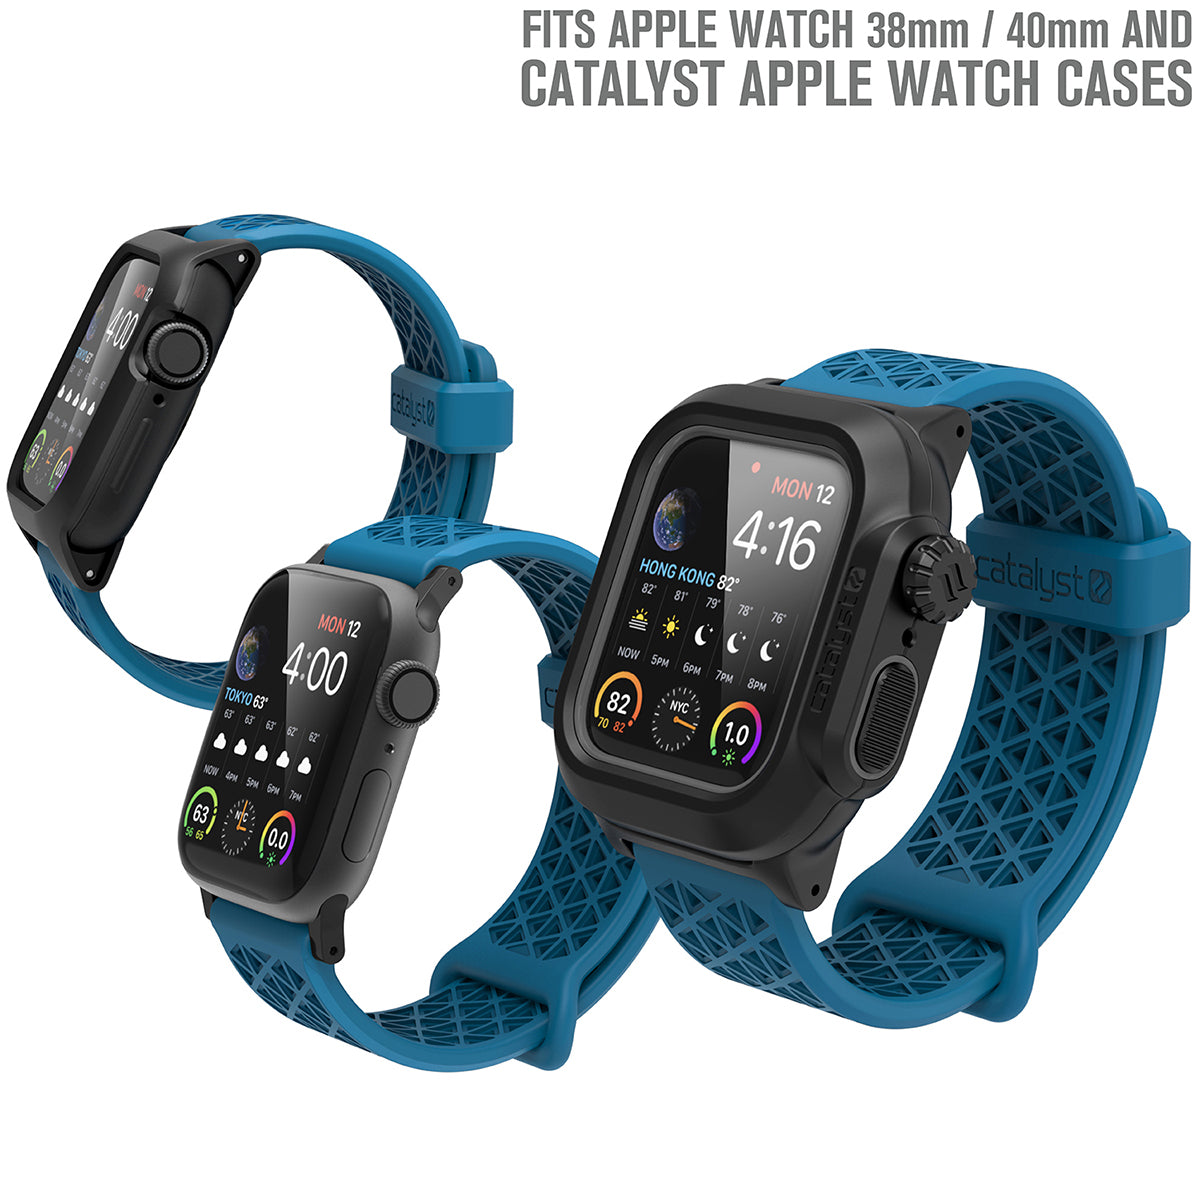 catalyst apple watch series 9 8 7 6 5 4 se gen 2 1 38 40 41mm sports band with apple connector three apple watches with impact and waterproof case with sports band blueridge text reads fits apple watch 38mm 40mm and catalyst apple watch cases